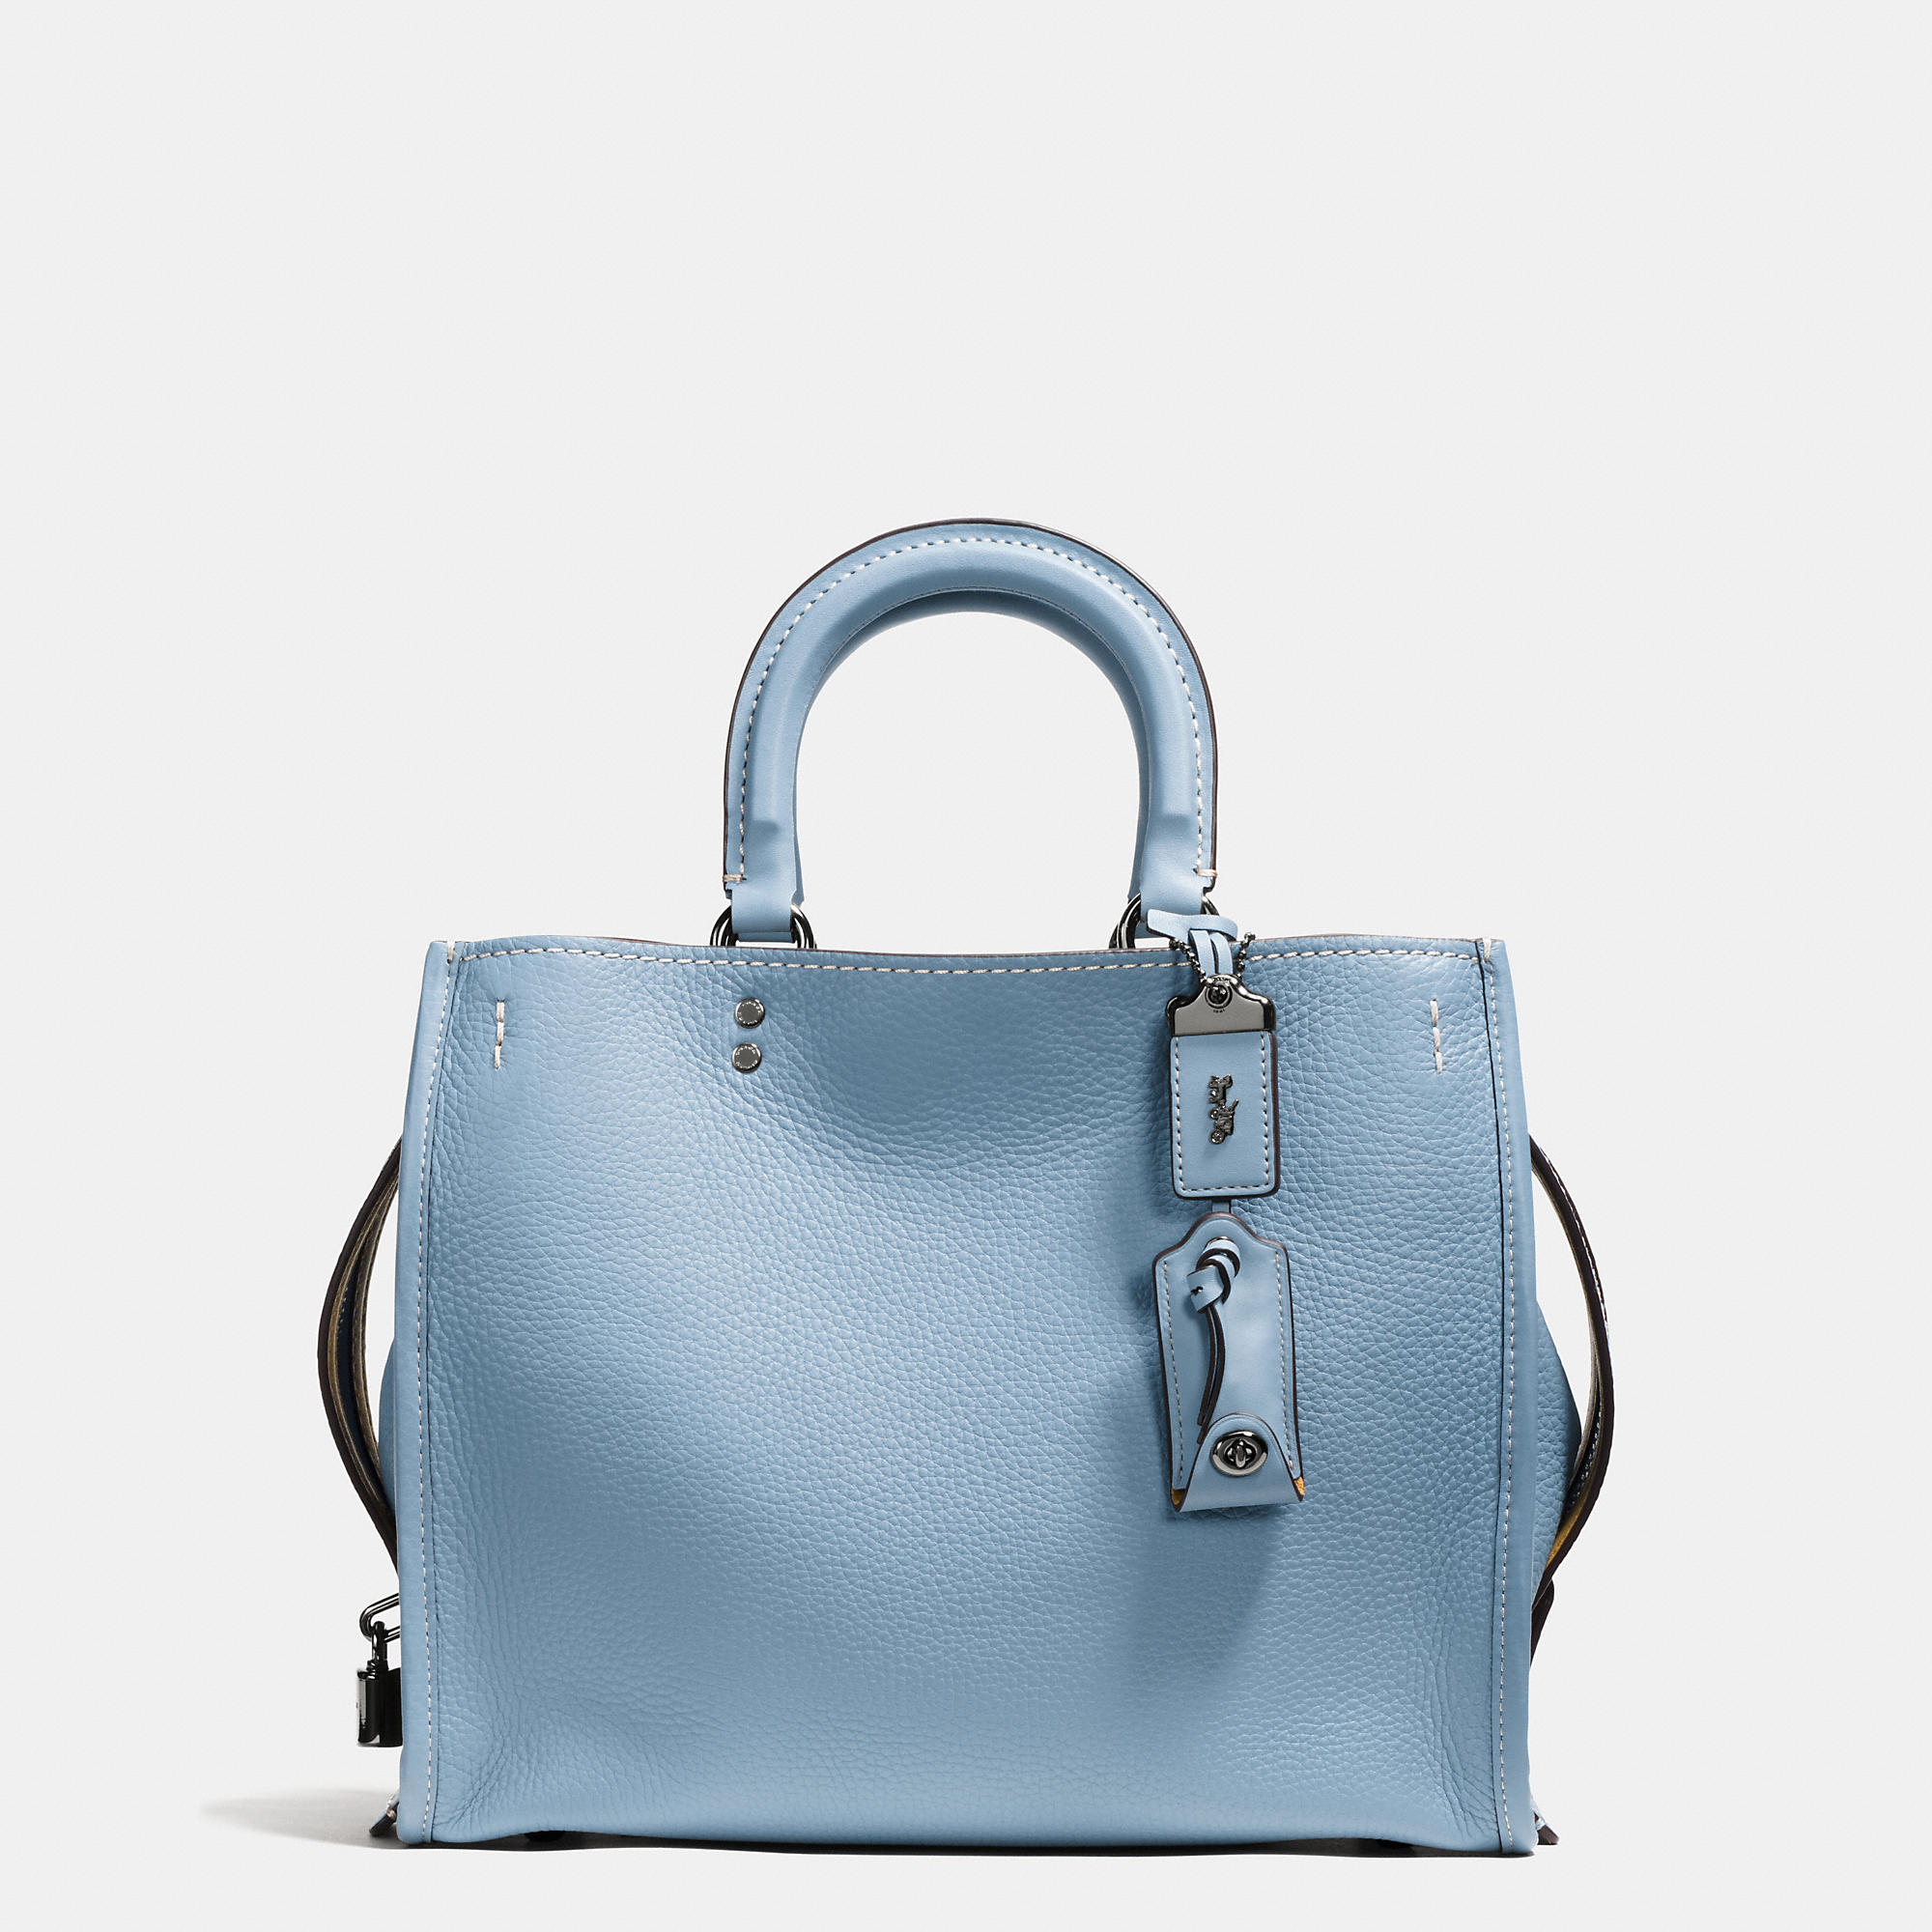 Fashion Coach Rogue Bag In Glovetanned Pebble Leather | Coach Outlet Canada